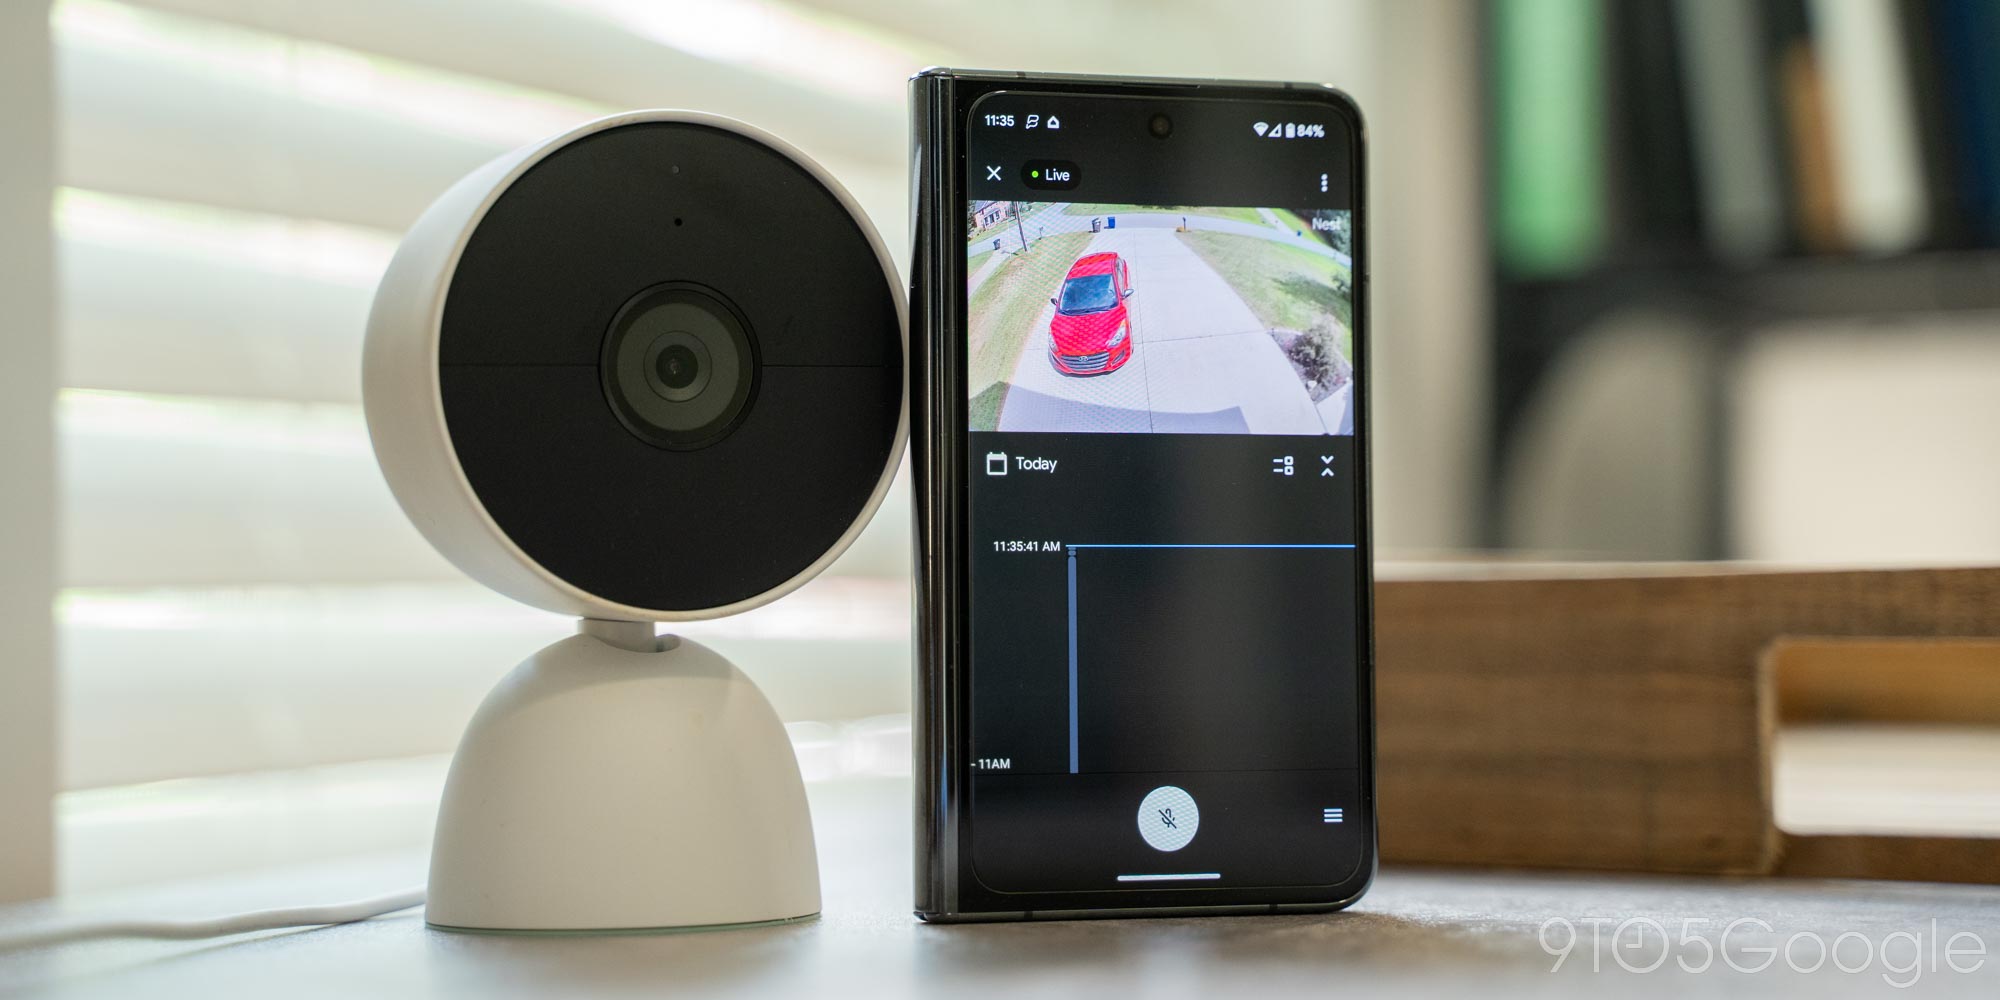 Nest Cameras are still hindered by software problems